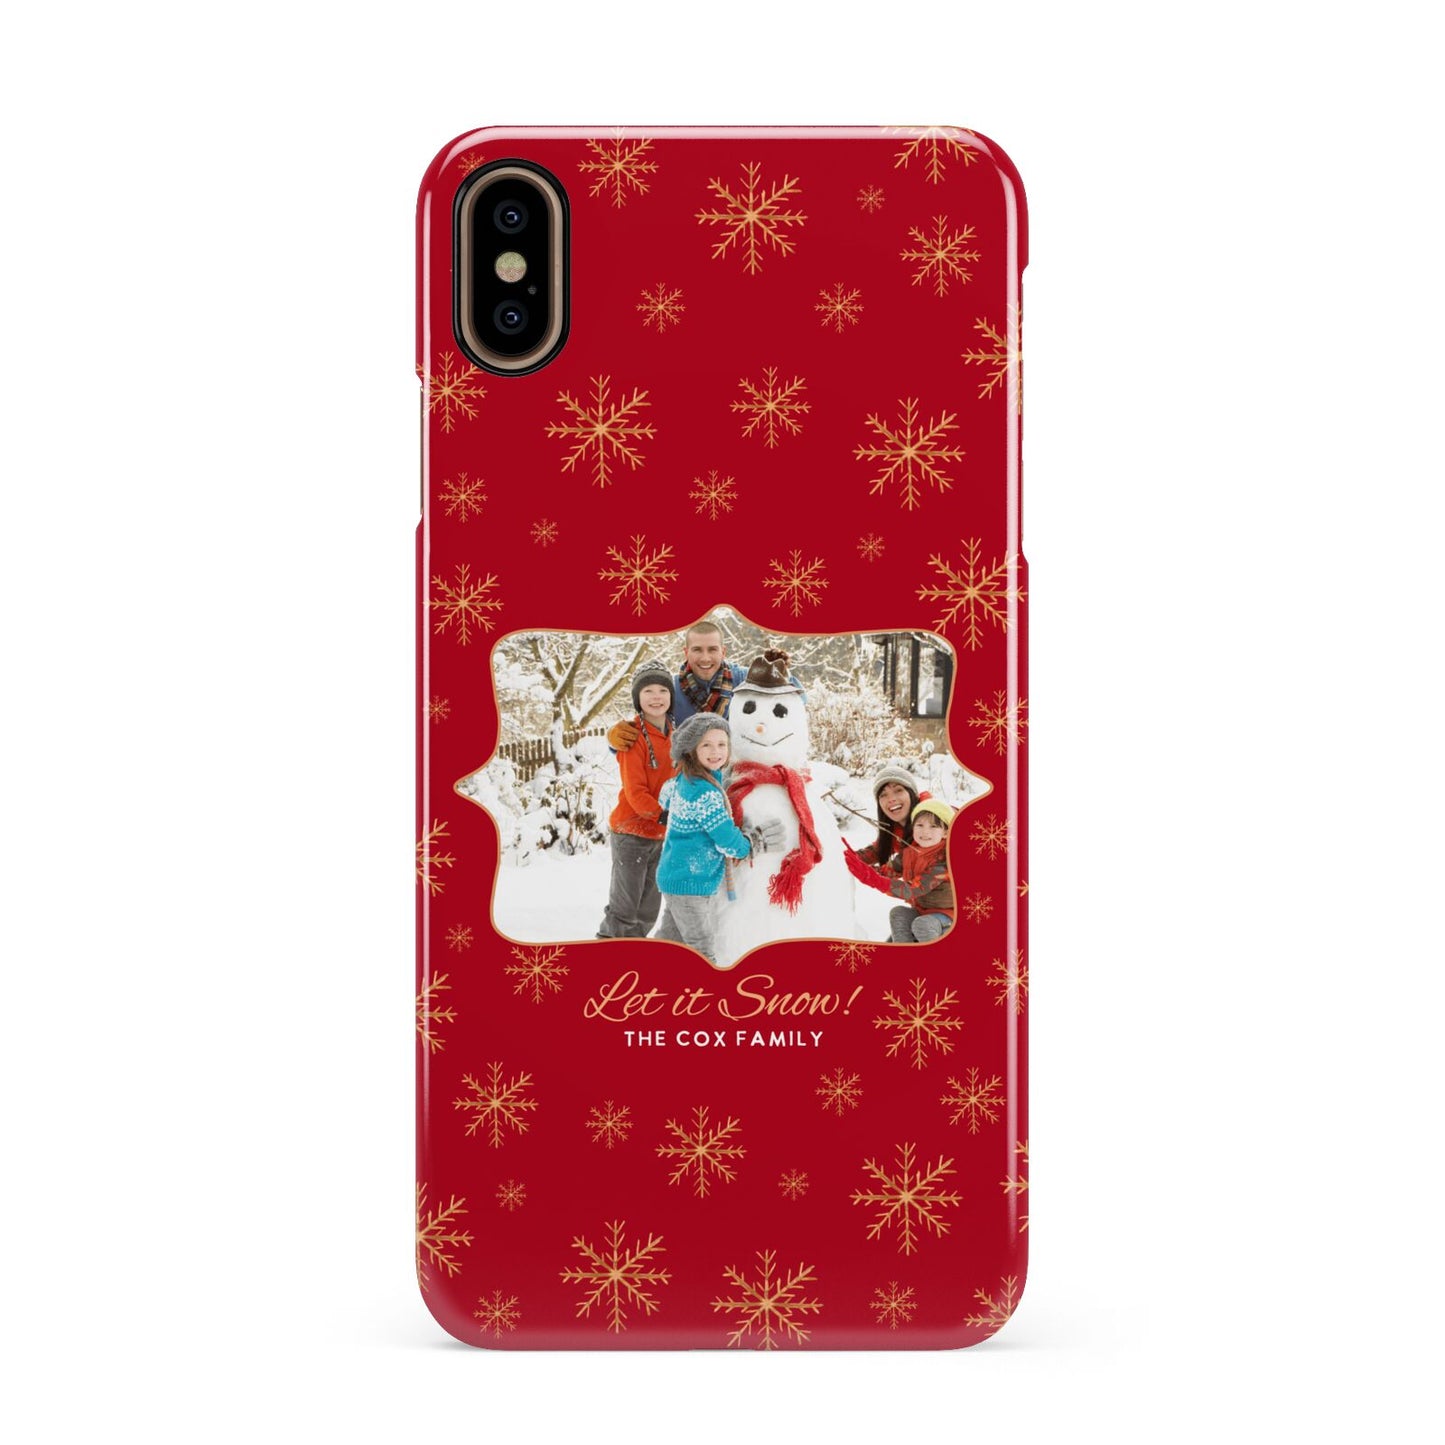 Let it Snow Christmas Photo Upload Apple iPhone Xs Max 3D Snap Case